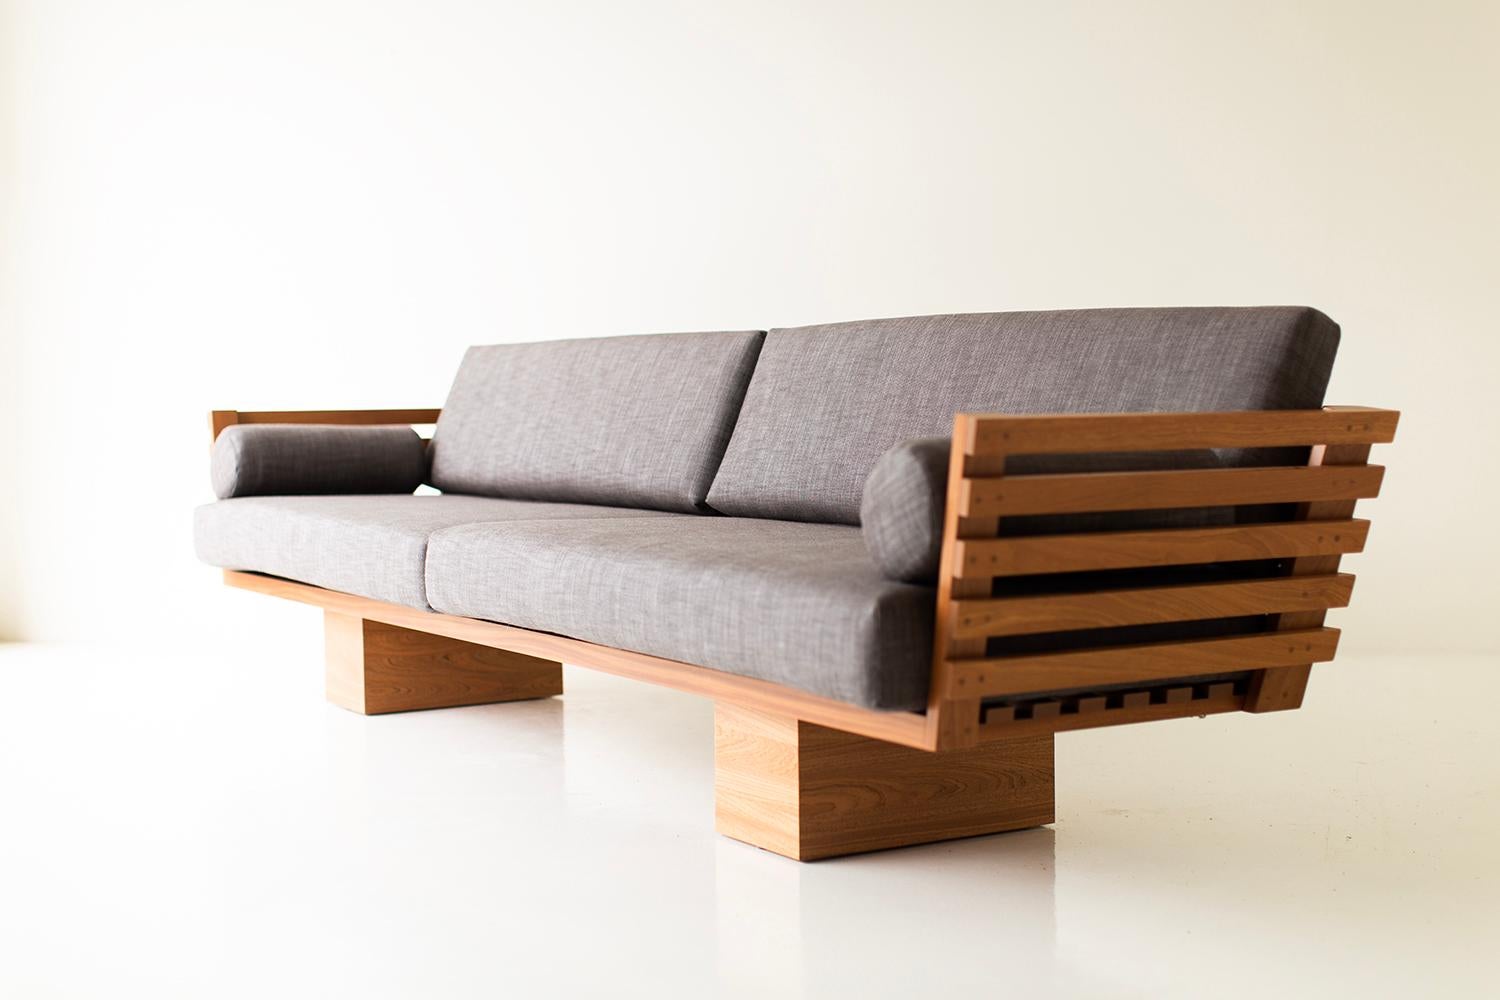 Bertu Outdoor Sofa, Outdoor Slatted Sofa, Large Sofa, Suelo

This Large Outdoor Slatted Suelo Sofa is beautifully constructed from solid wood in Ohio, USA. The length is a full 10' but can be customized as you see fit. This sofas's silhouette is